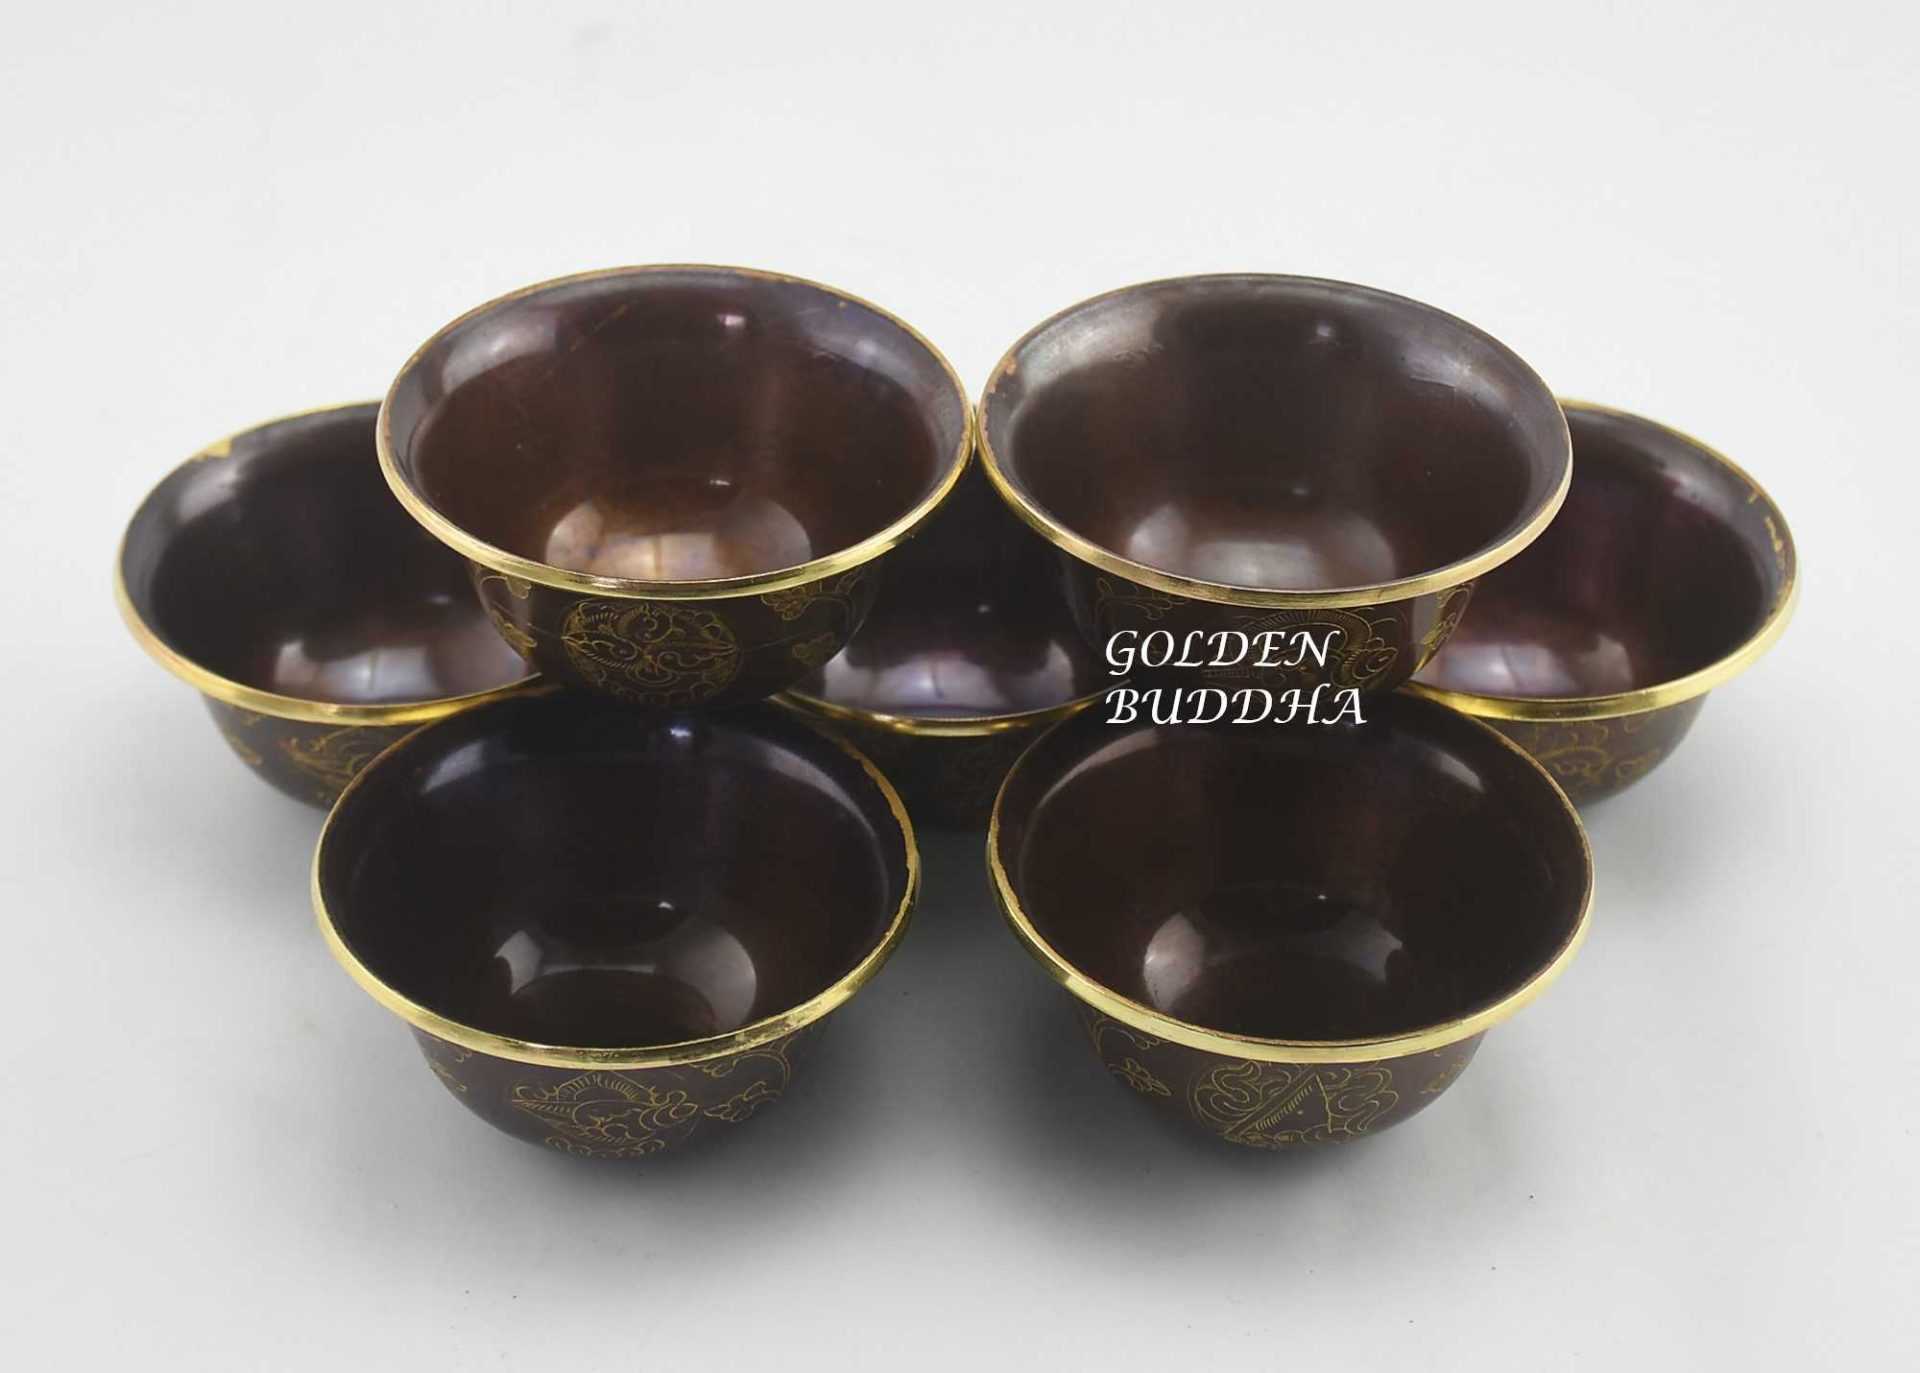 2.75" Set of Seven Oxidized Water Offering Bowls, Fire Gilded 24k Gold Details, Handmade - Interior Display